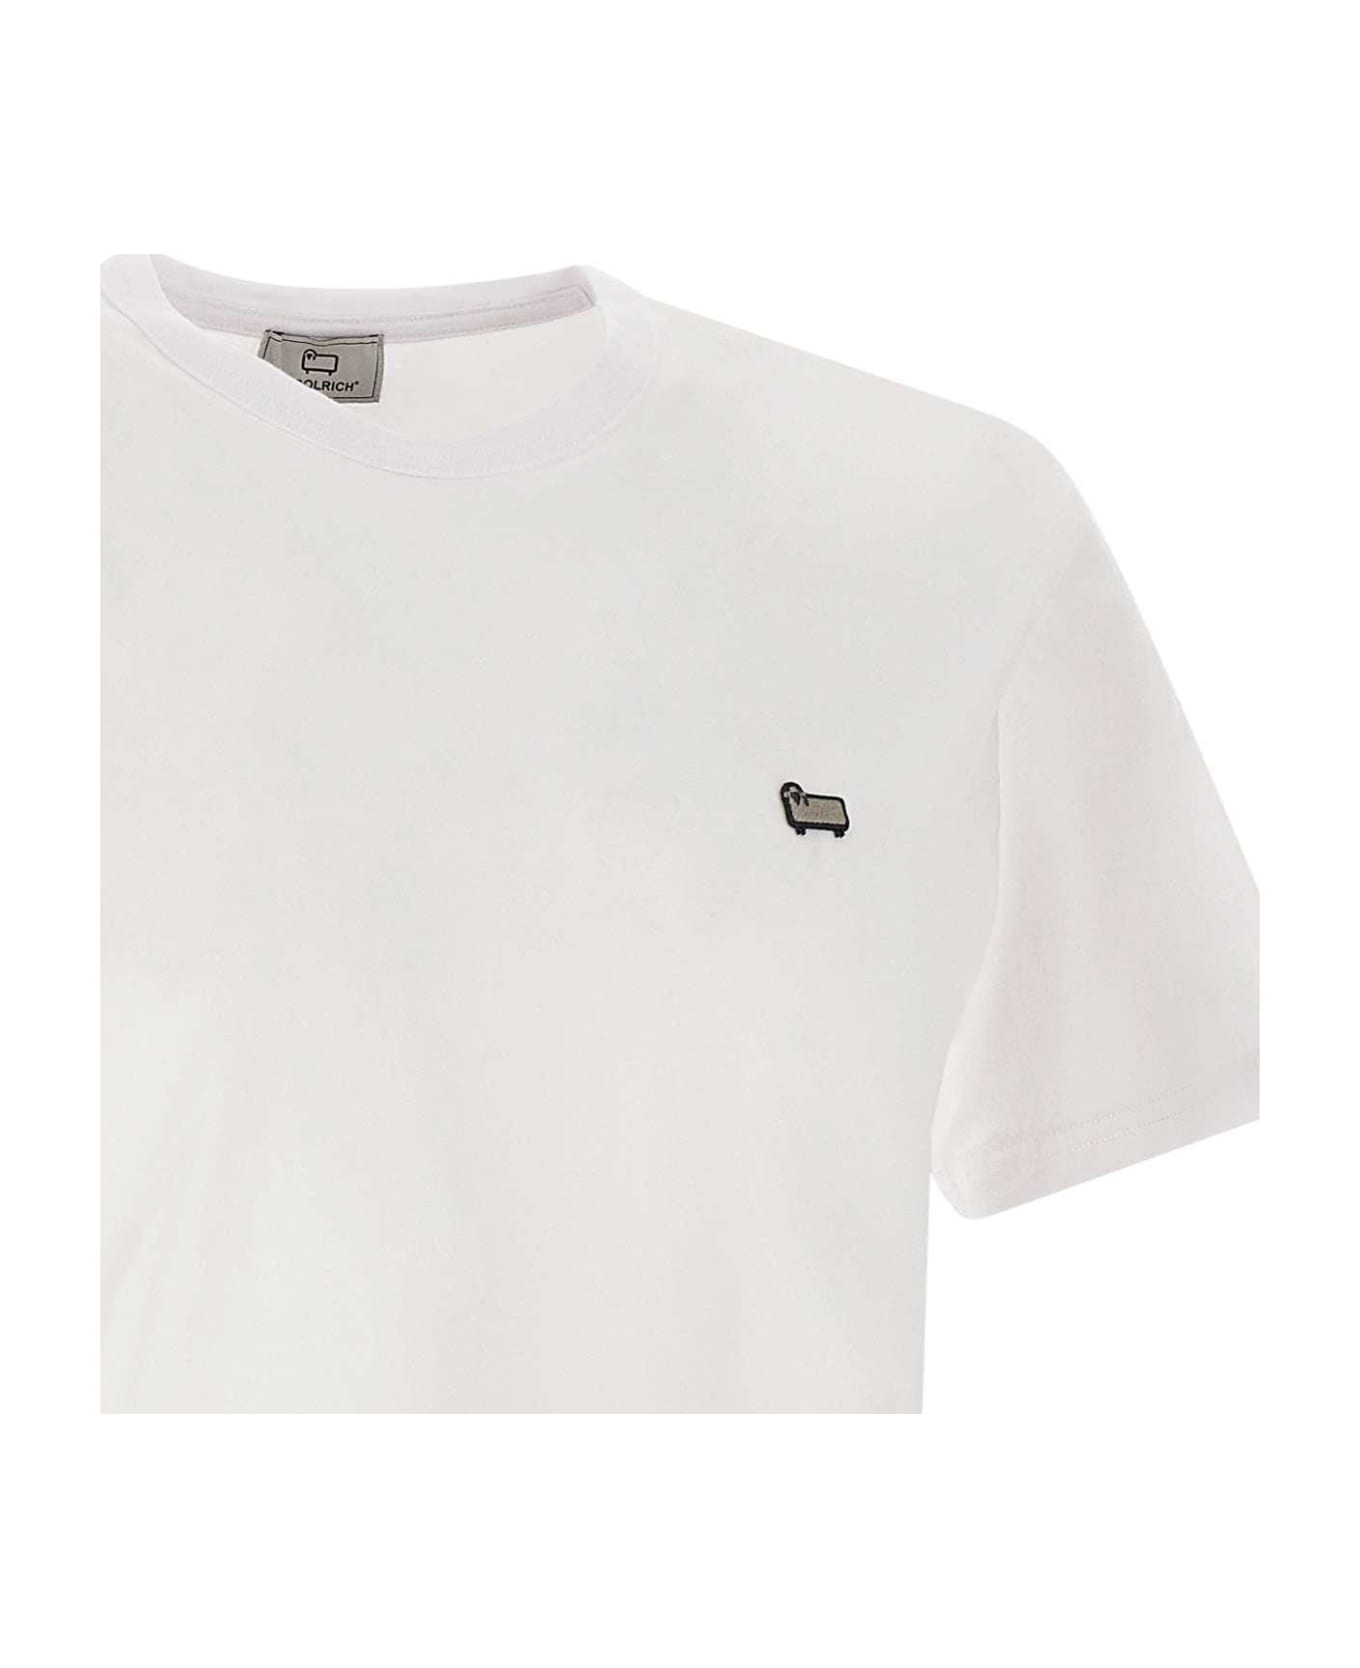 Woolrich Logo Embroidered Crewneck T-shirt - Bright White